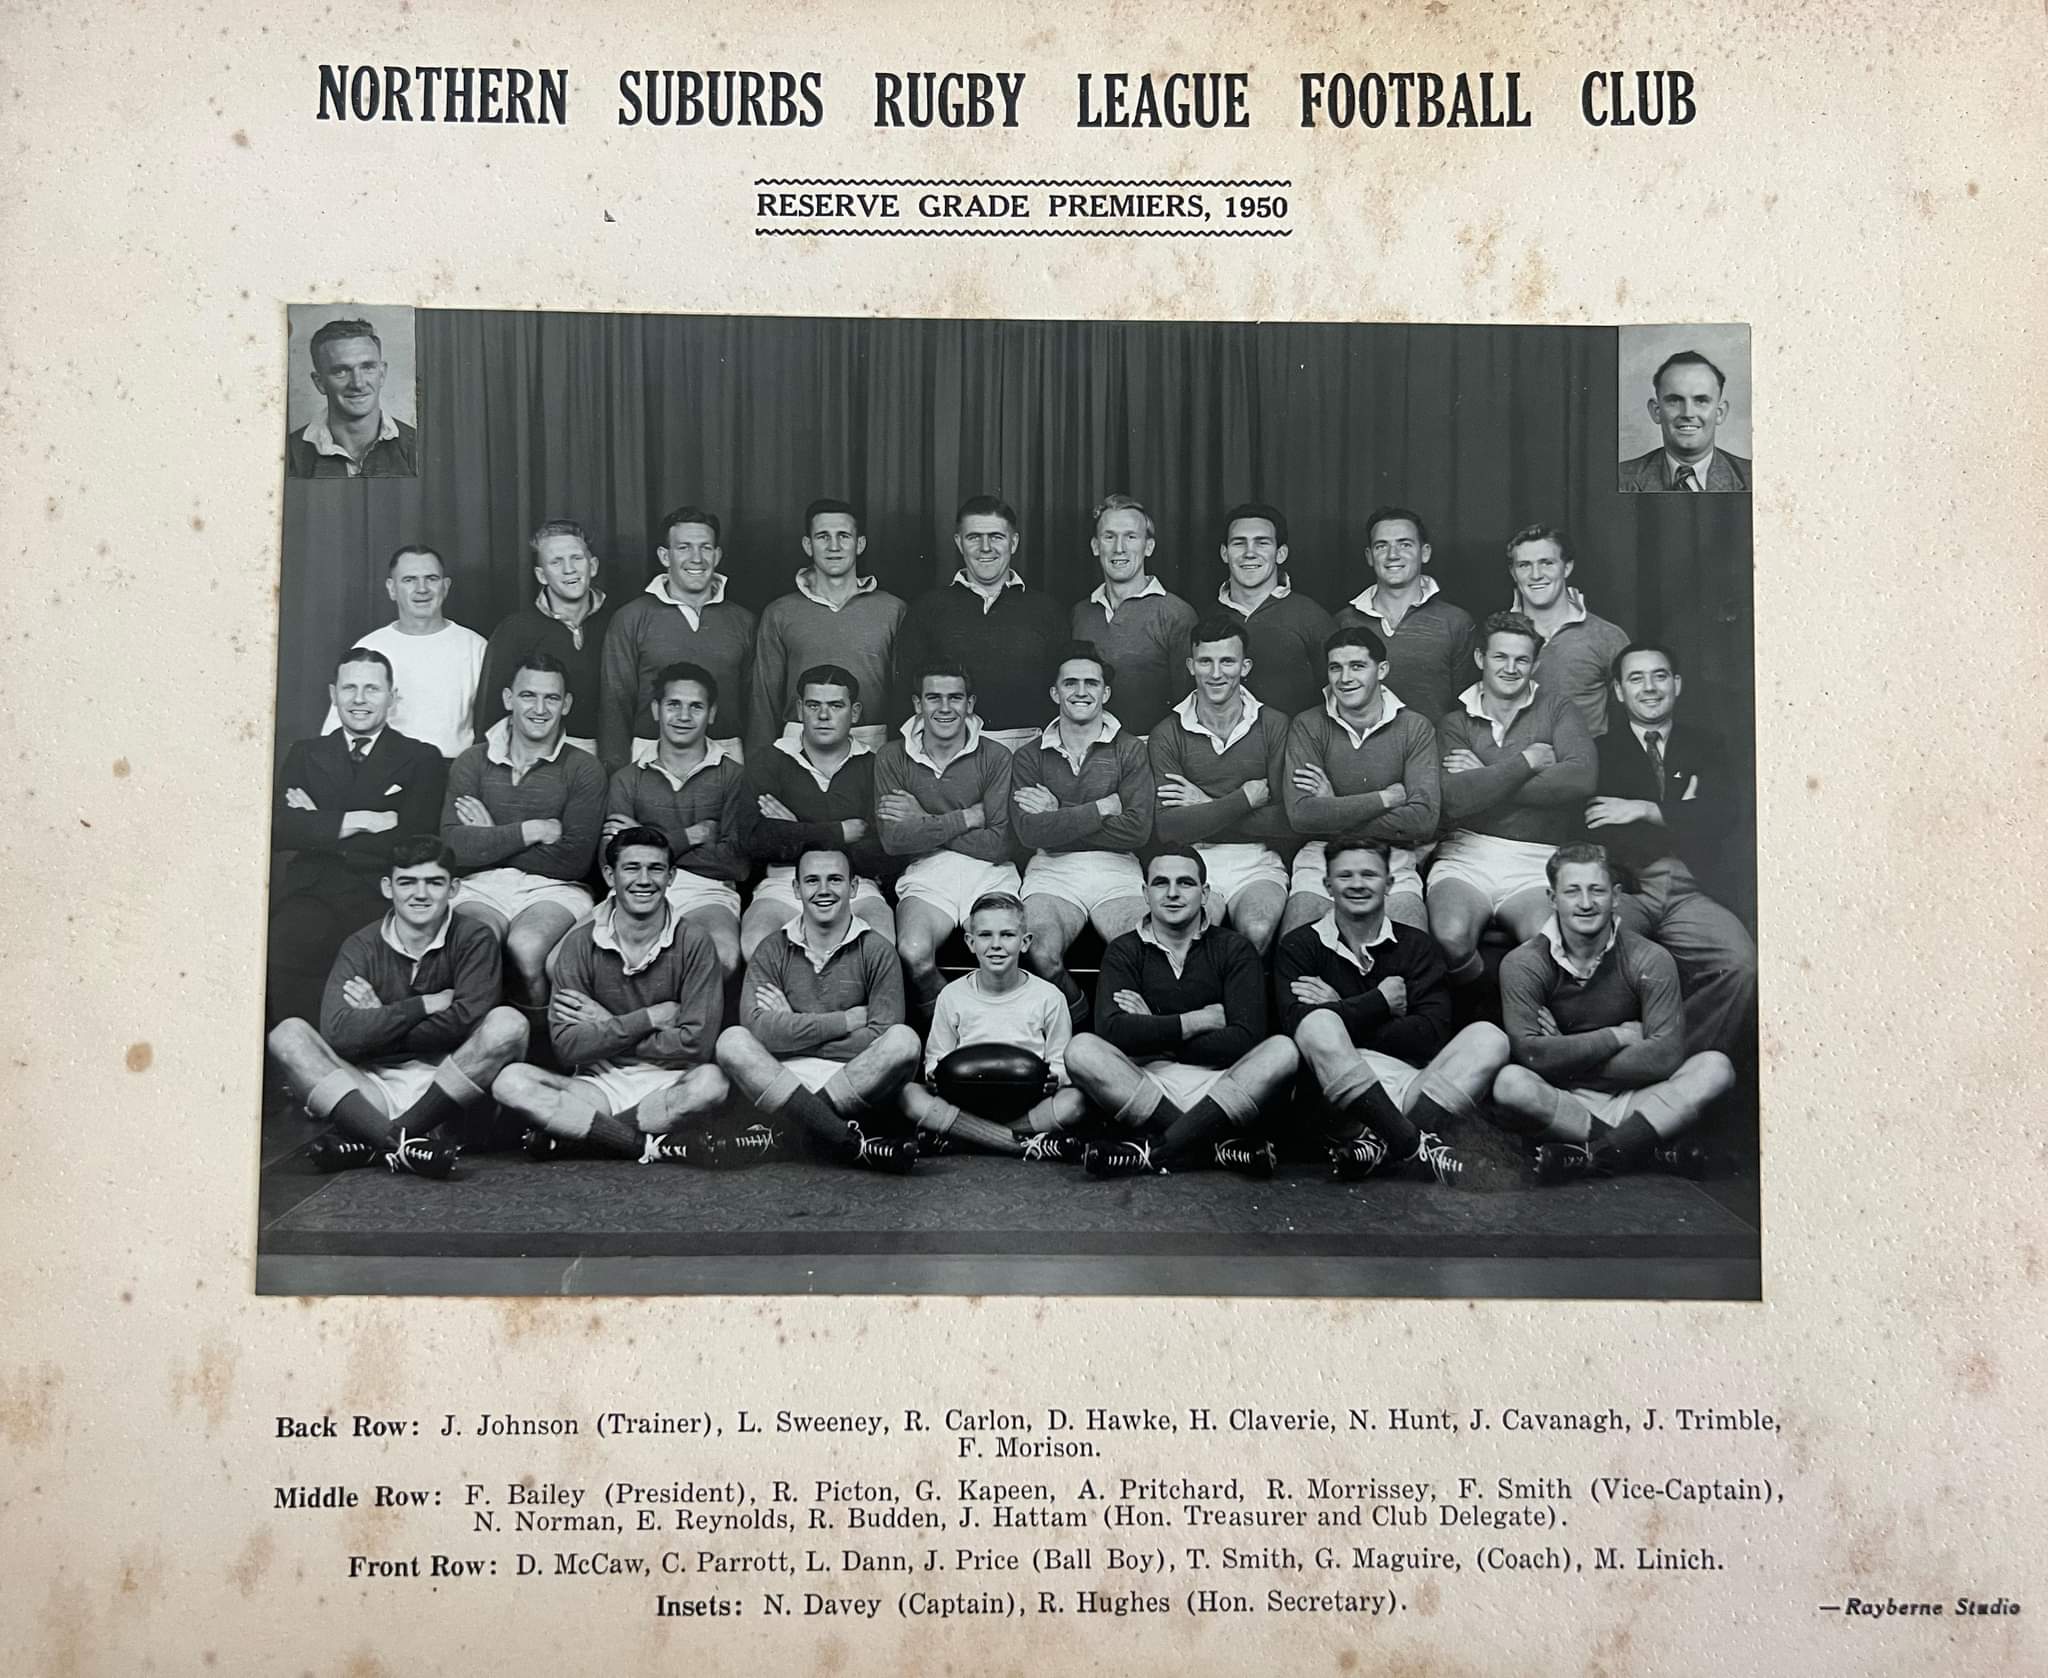 Northern Suburbs Reserve Grade Premiers 1950.